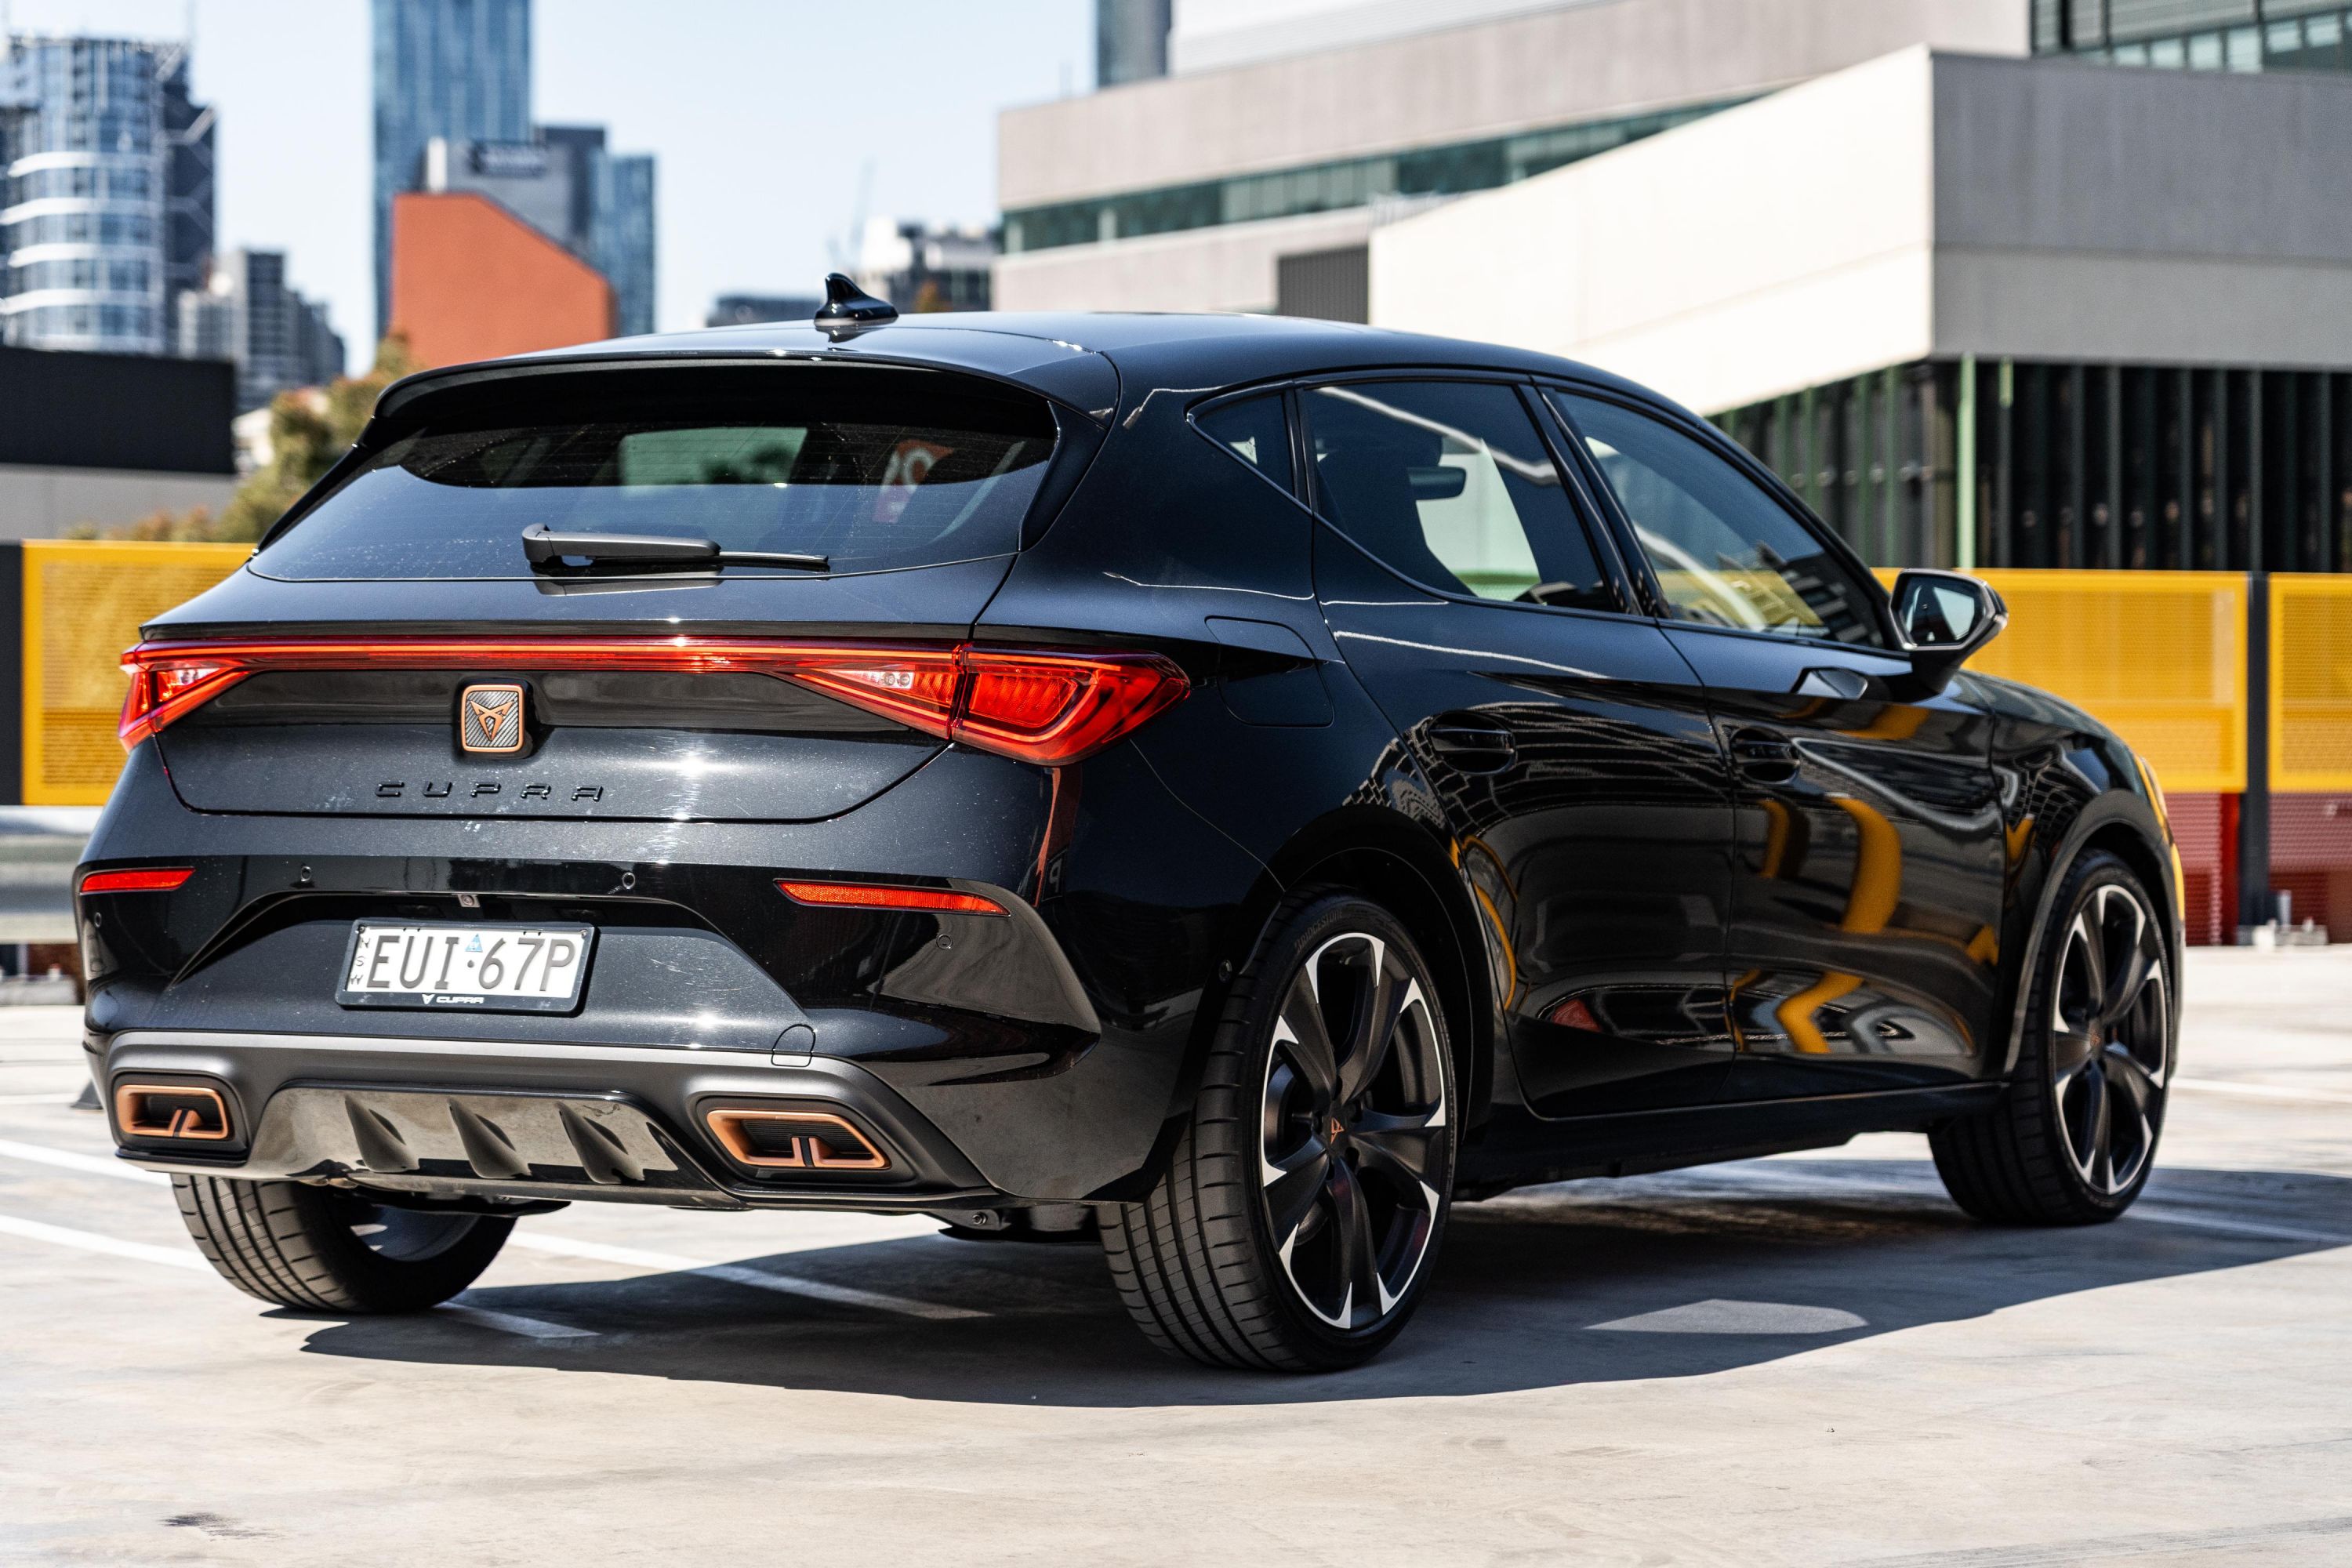 NEWS: Cupra Leon wide kit is now also available for the Hatchback (5-door)